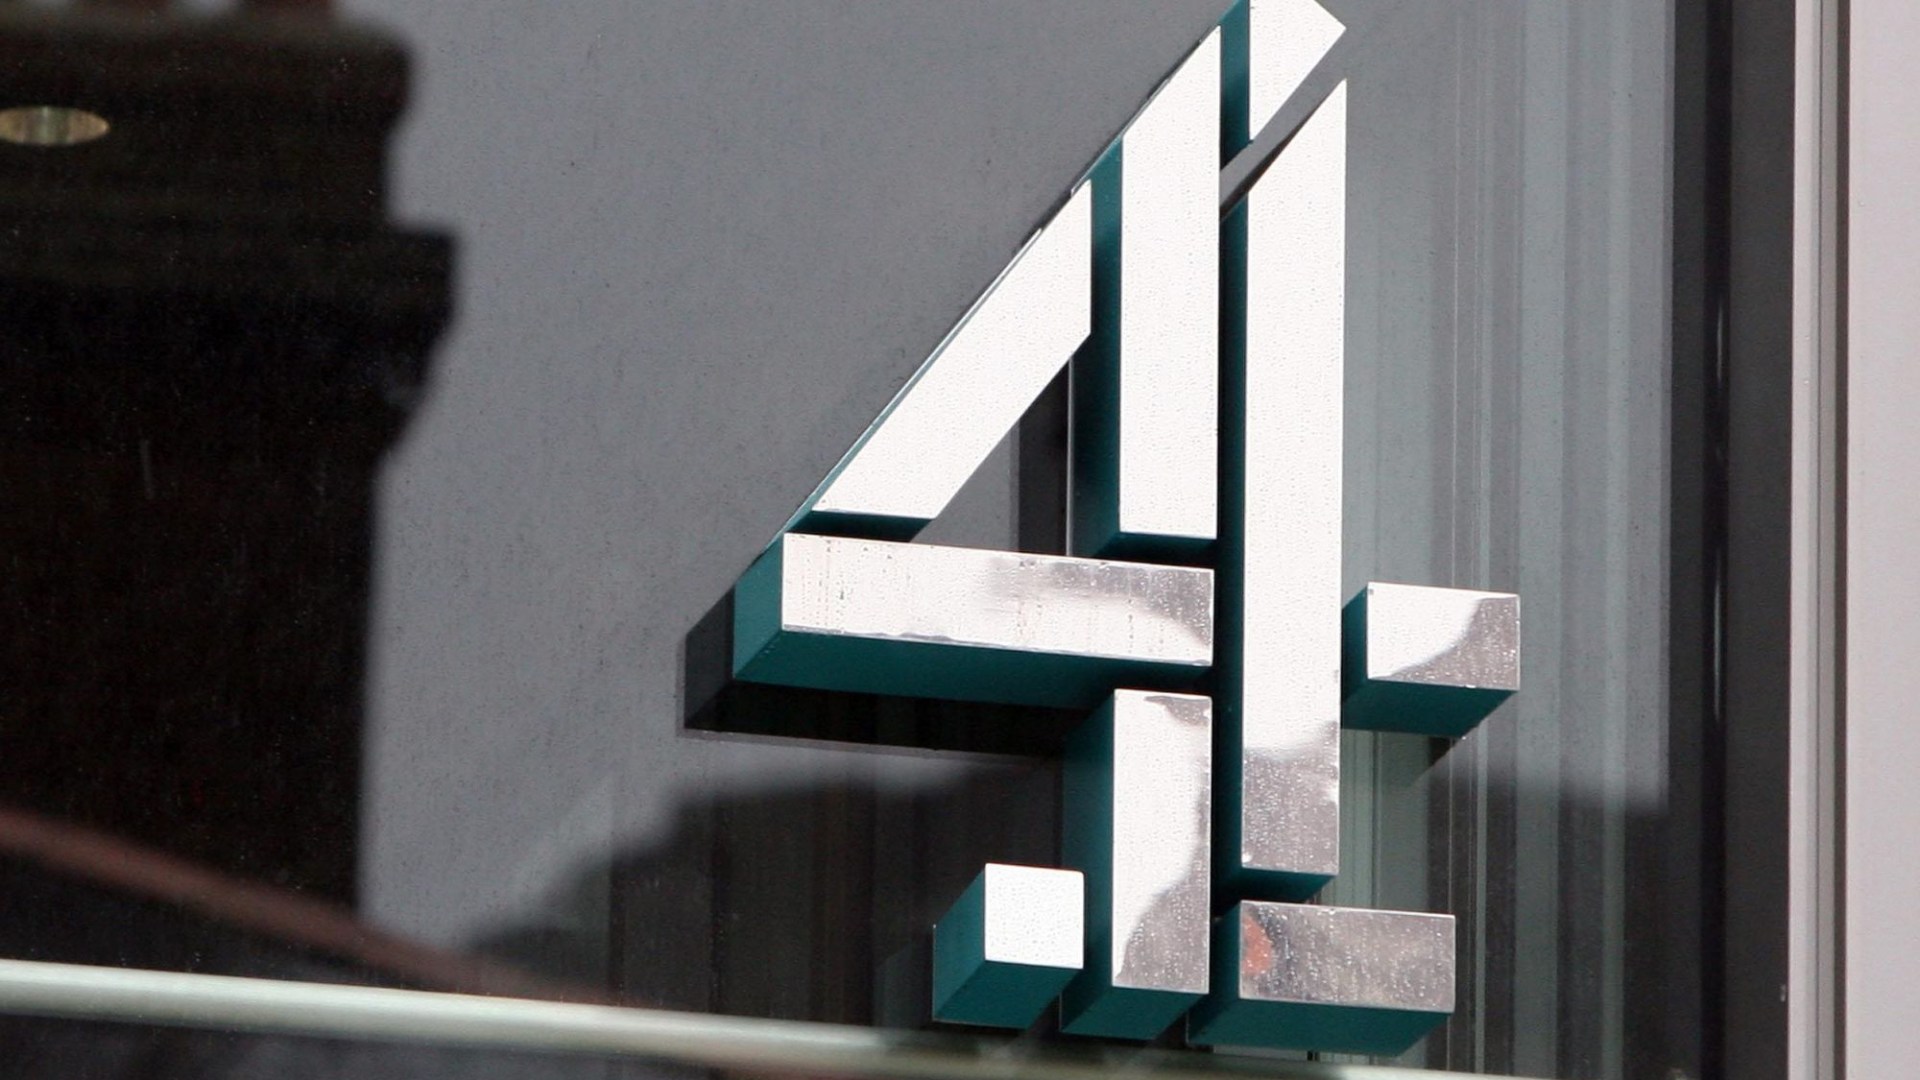 Get ready to shine on screen with the return of beloved Channel 4 competition show – find out how to star in the next series now!